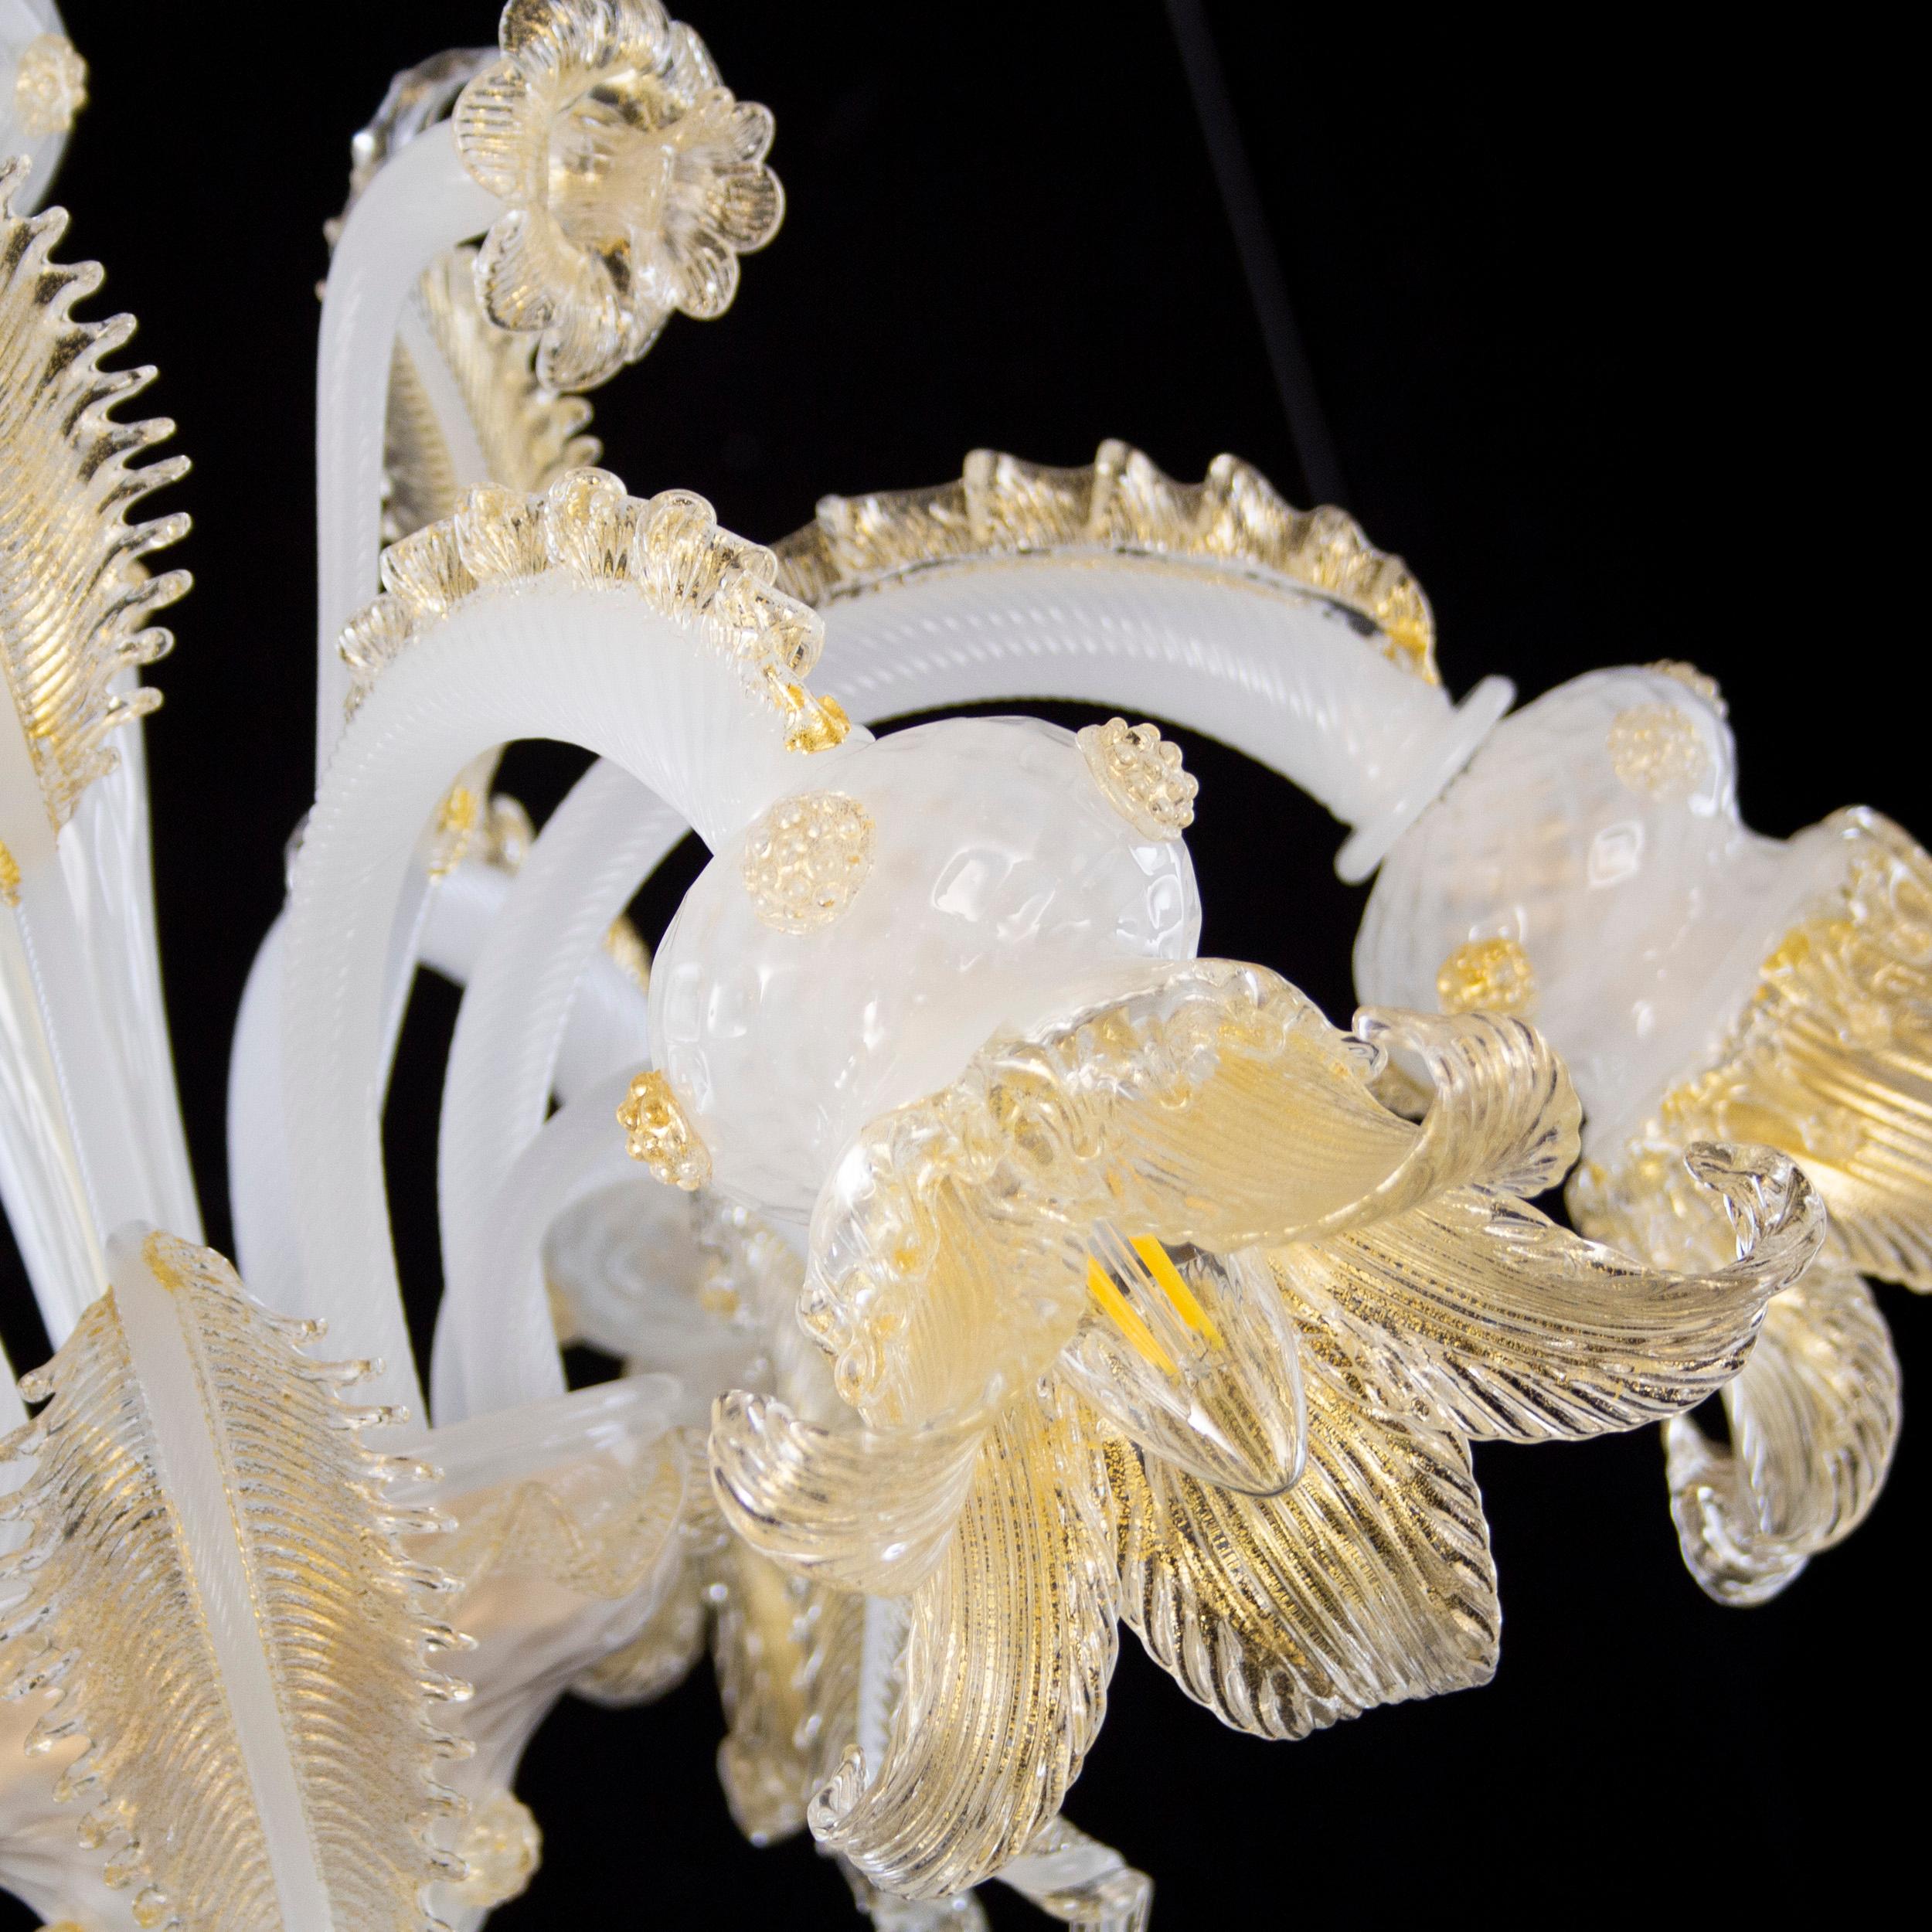 Luxury chandelier 6 arms silk, gold and clear Murano glass with upper flowers and leaves Golden-Century 86 by Multiforme
The collection of artistic glass chandeliers Golden Century 086 is a tribute to the golden and luxurious Venice of the XVIIIth.